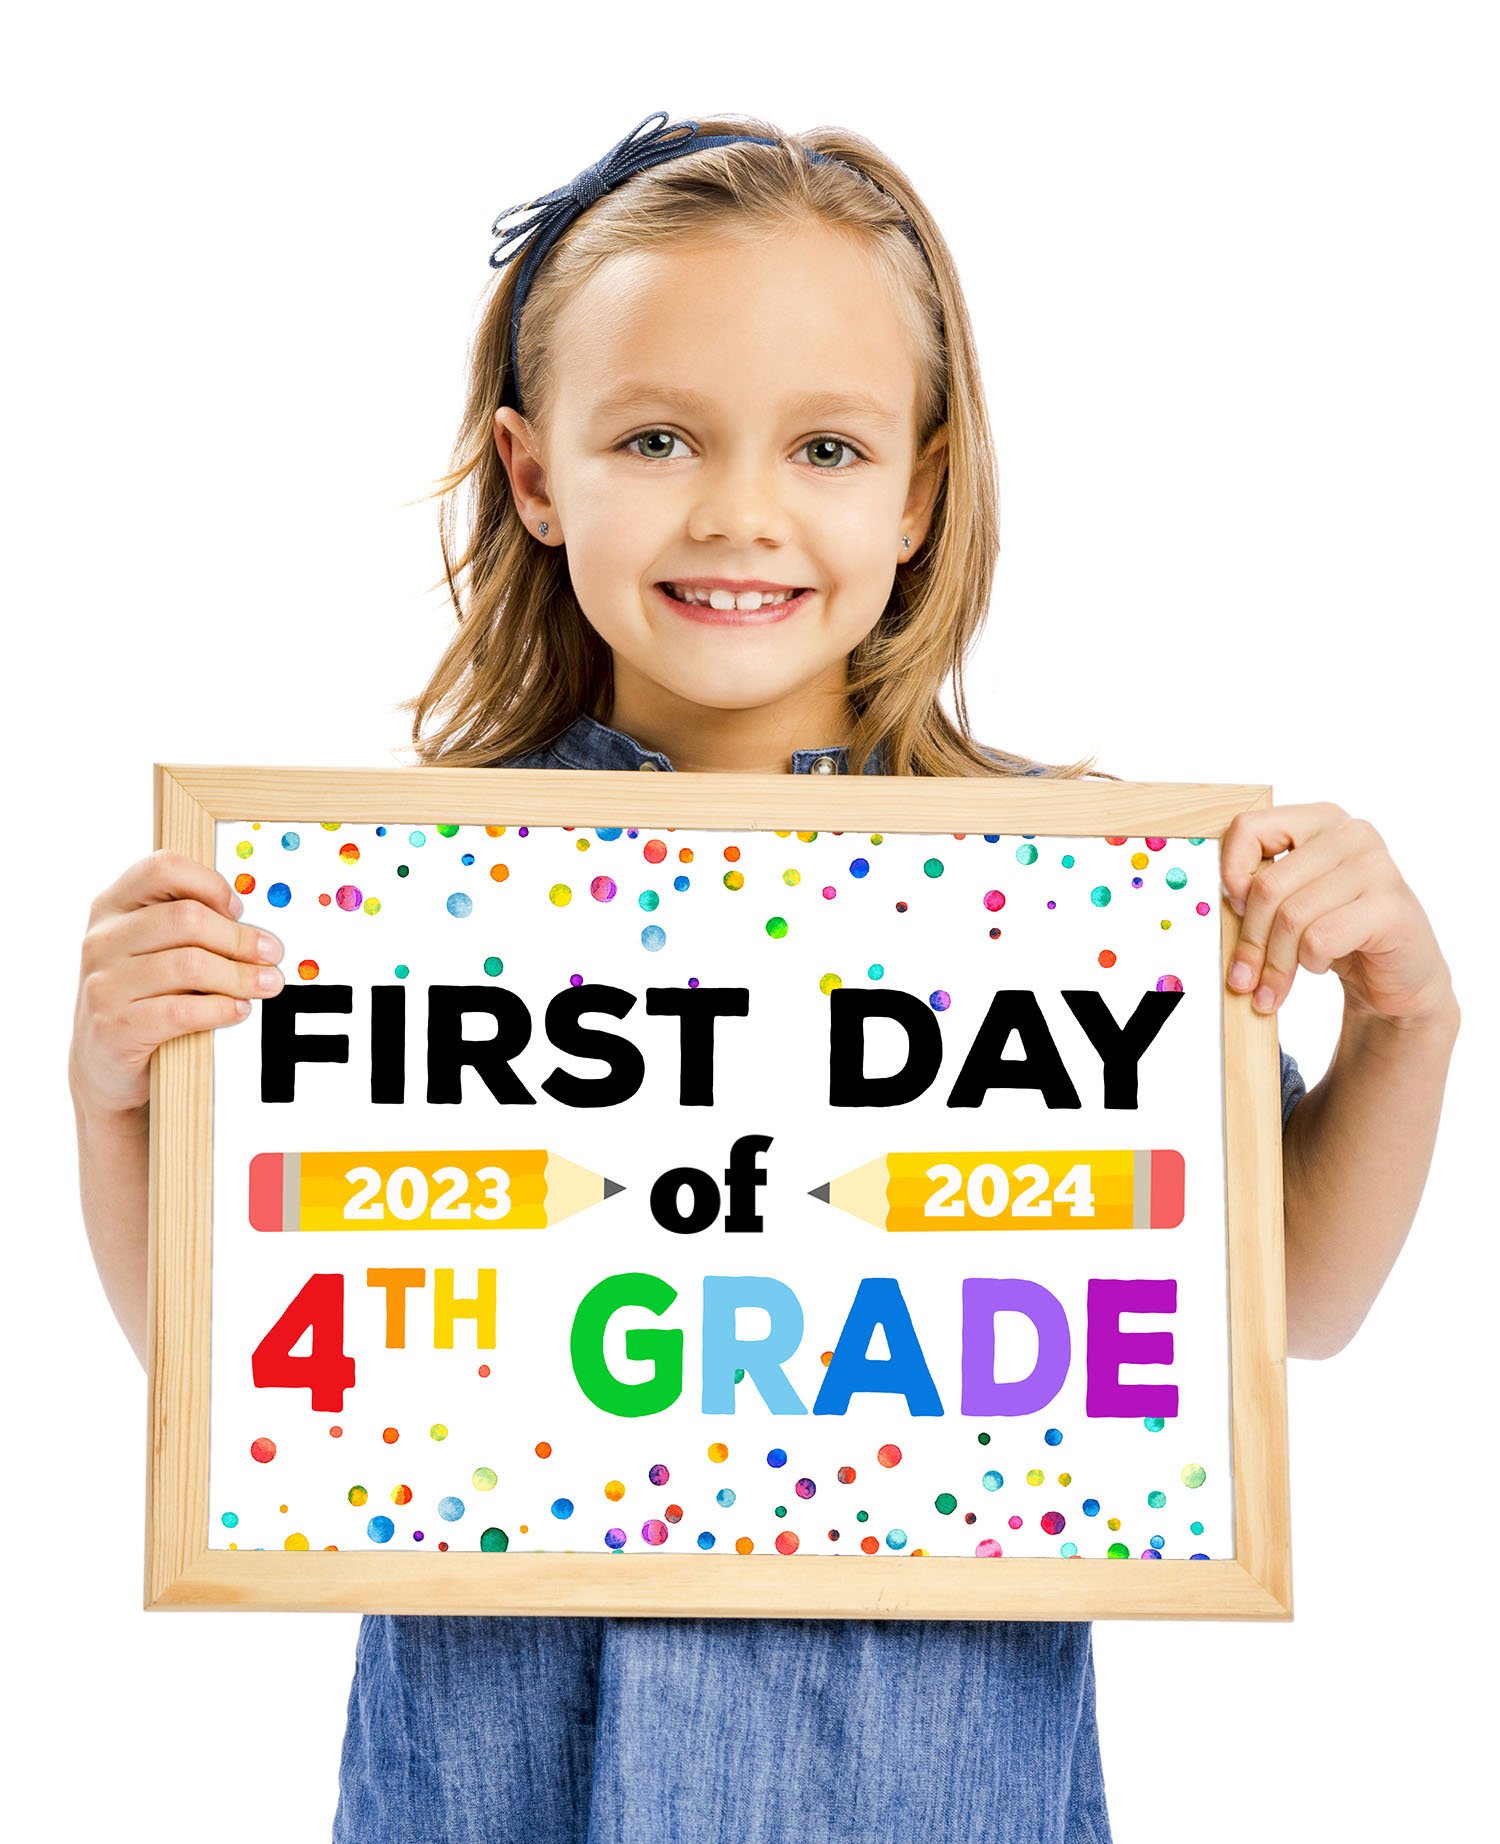 Cute white girl with short brown hair holding a First Day of 4th Grade sign